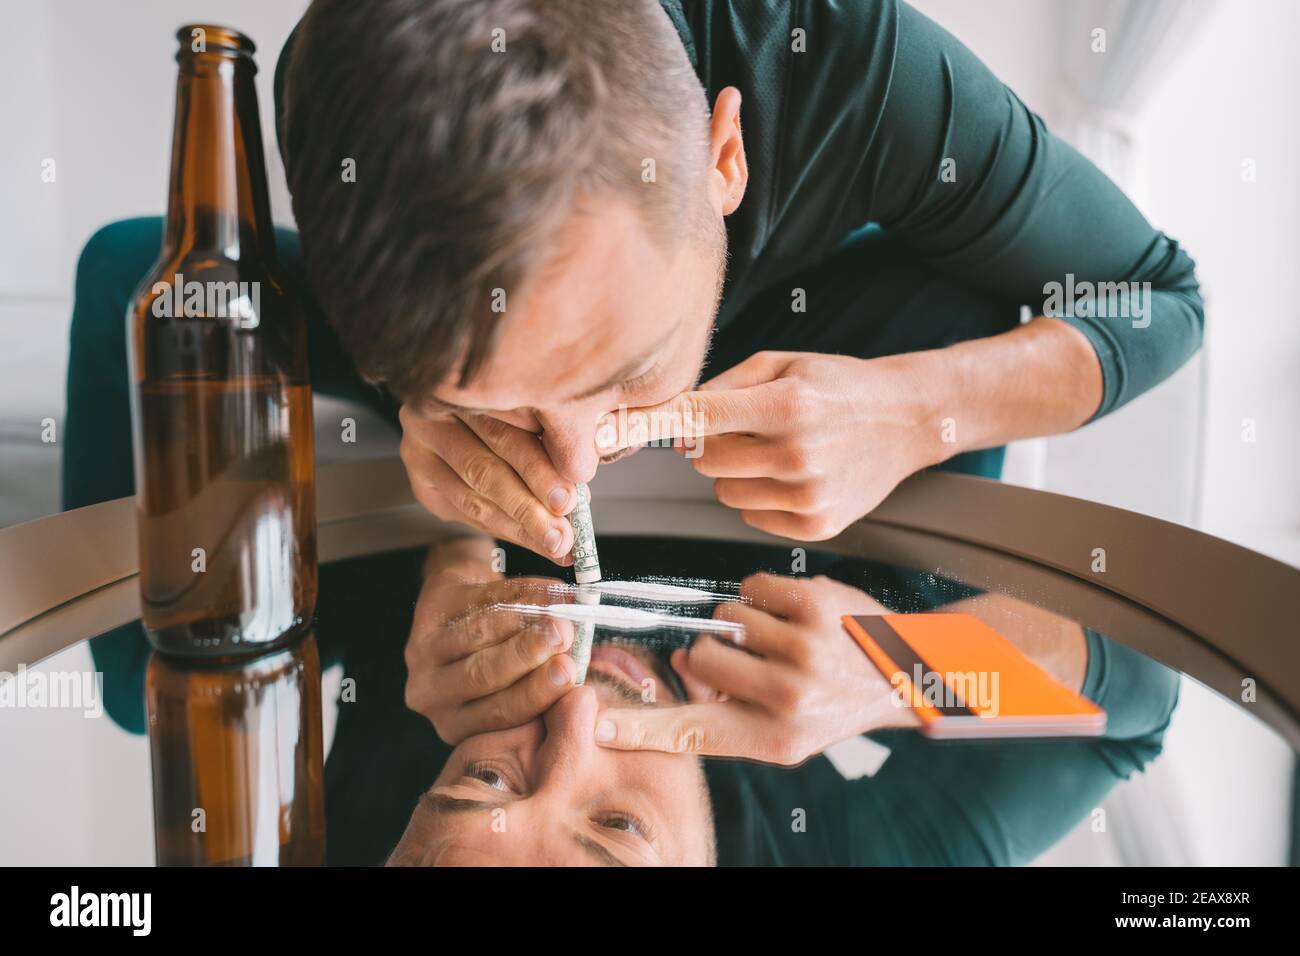 Young addicted junkie man sniffing or snorting cocaine lines on mirror through rolled banknote. Narcotics and addiction concept. Stock Photo